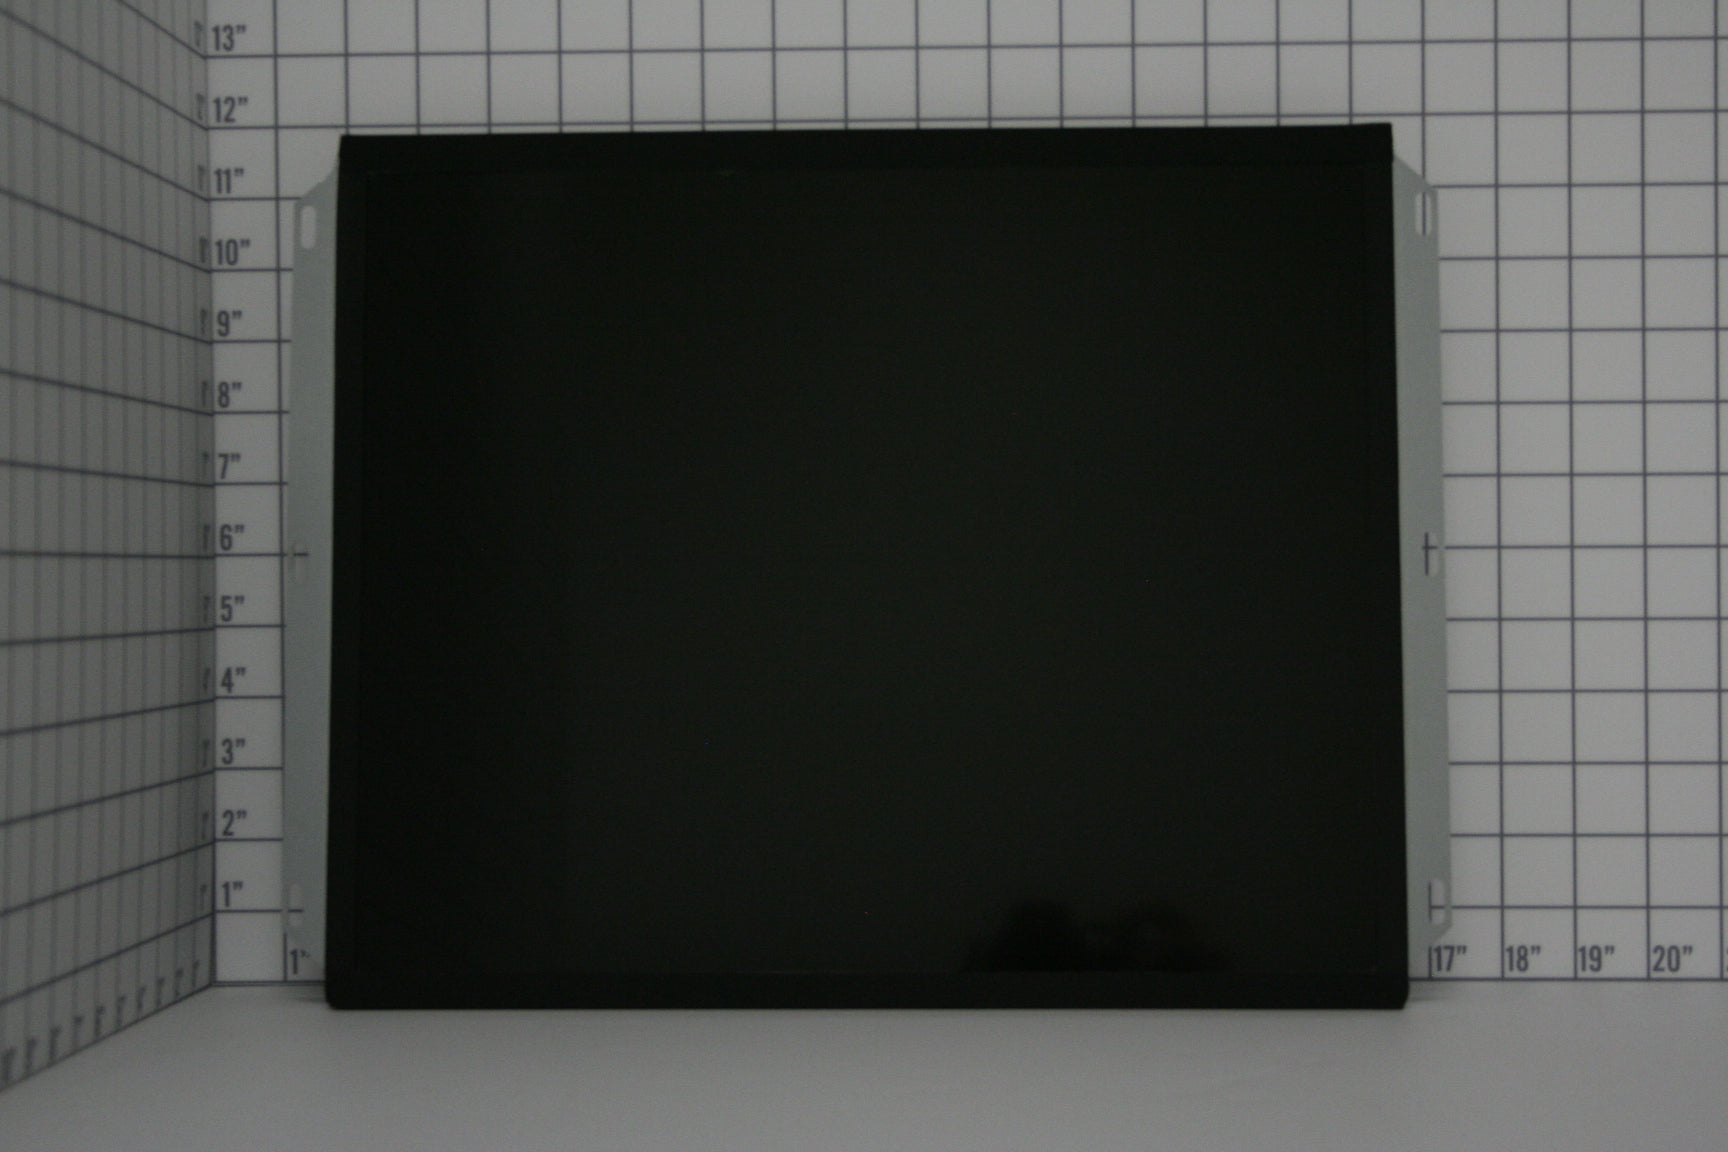 LCD MONITOR 17 INCH 16:9 [XSIABPUS013] for ICE game(s)